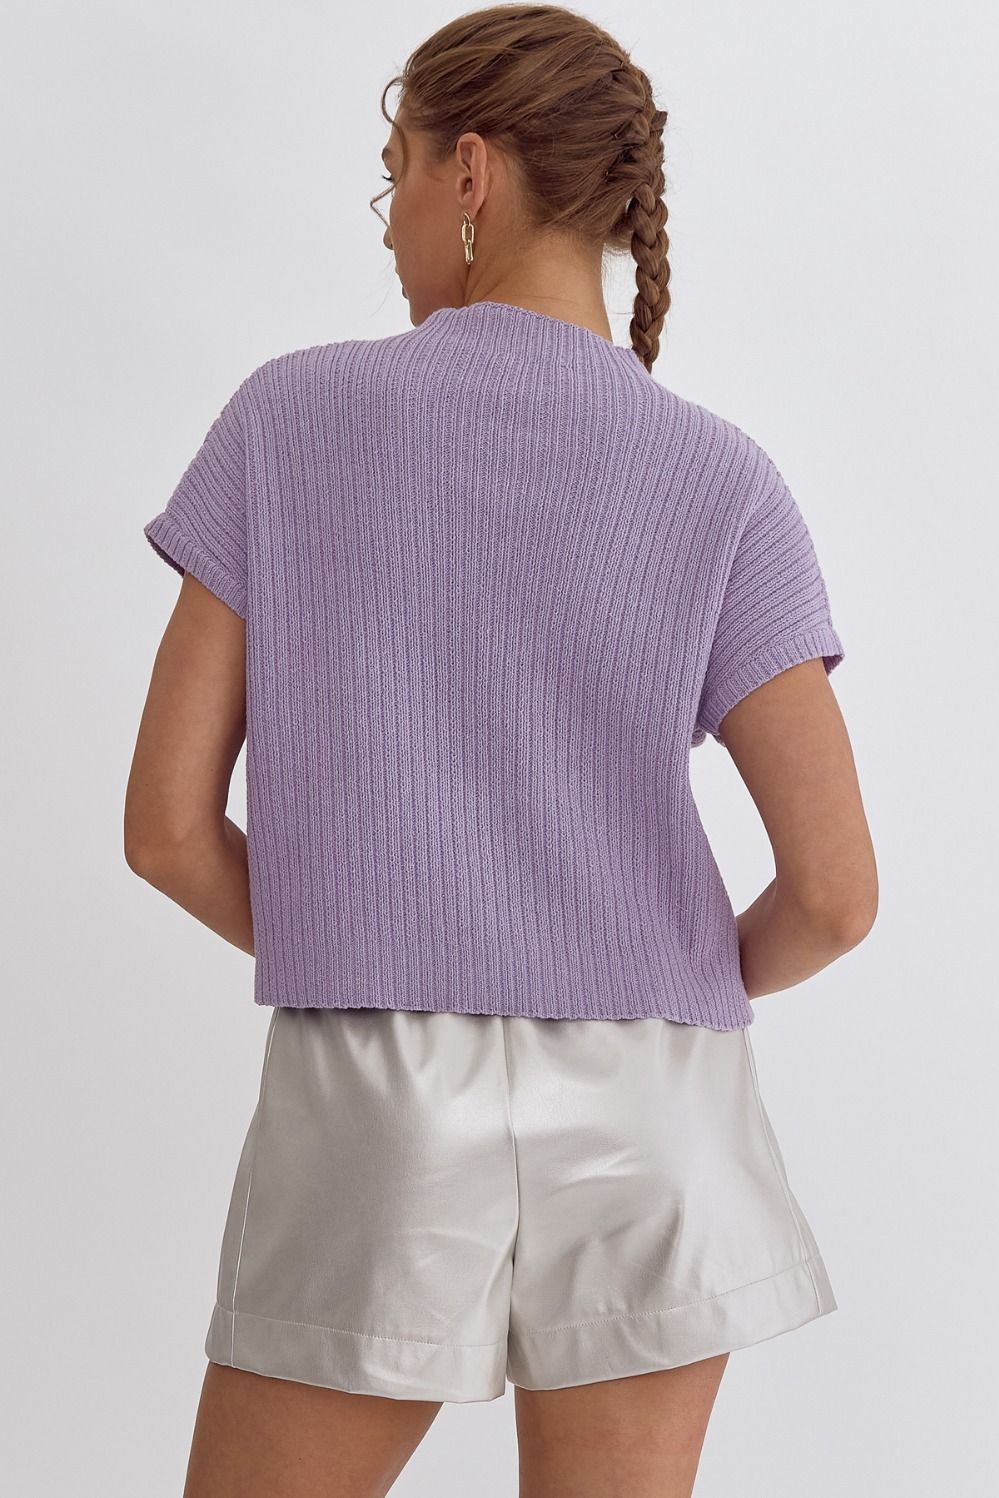 Need You Now Knit Top in Lavender